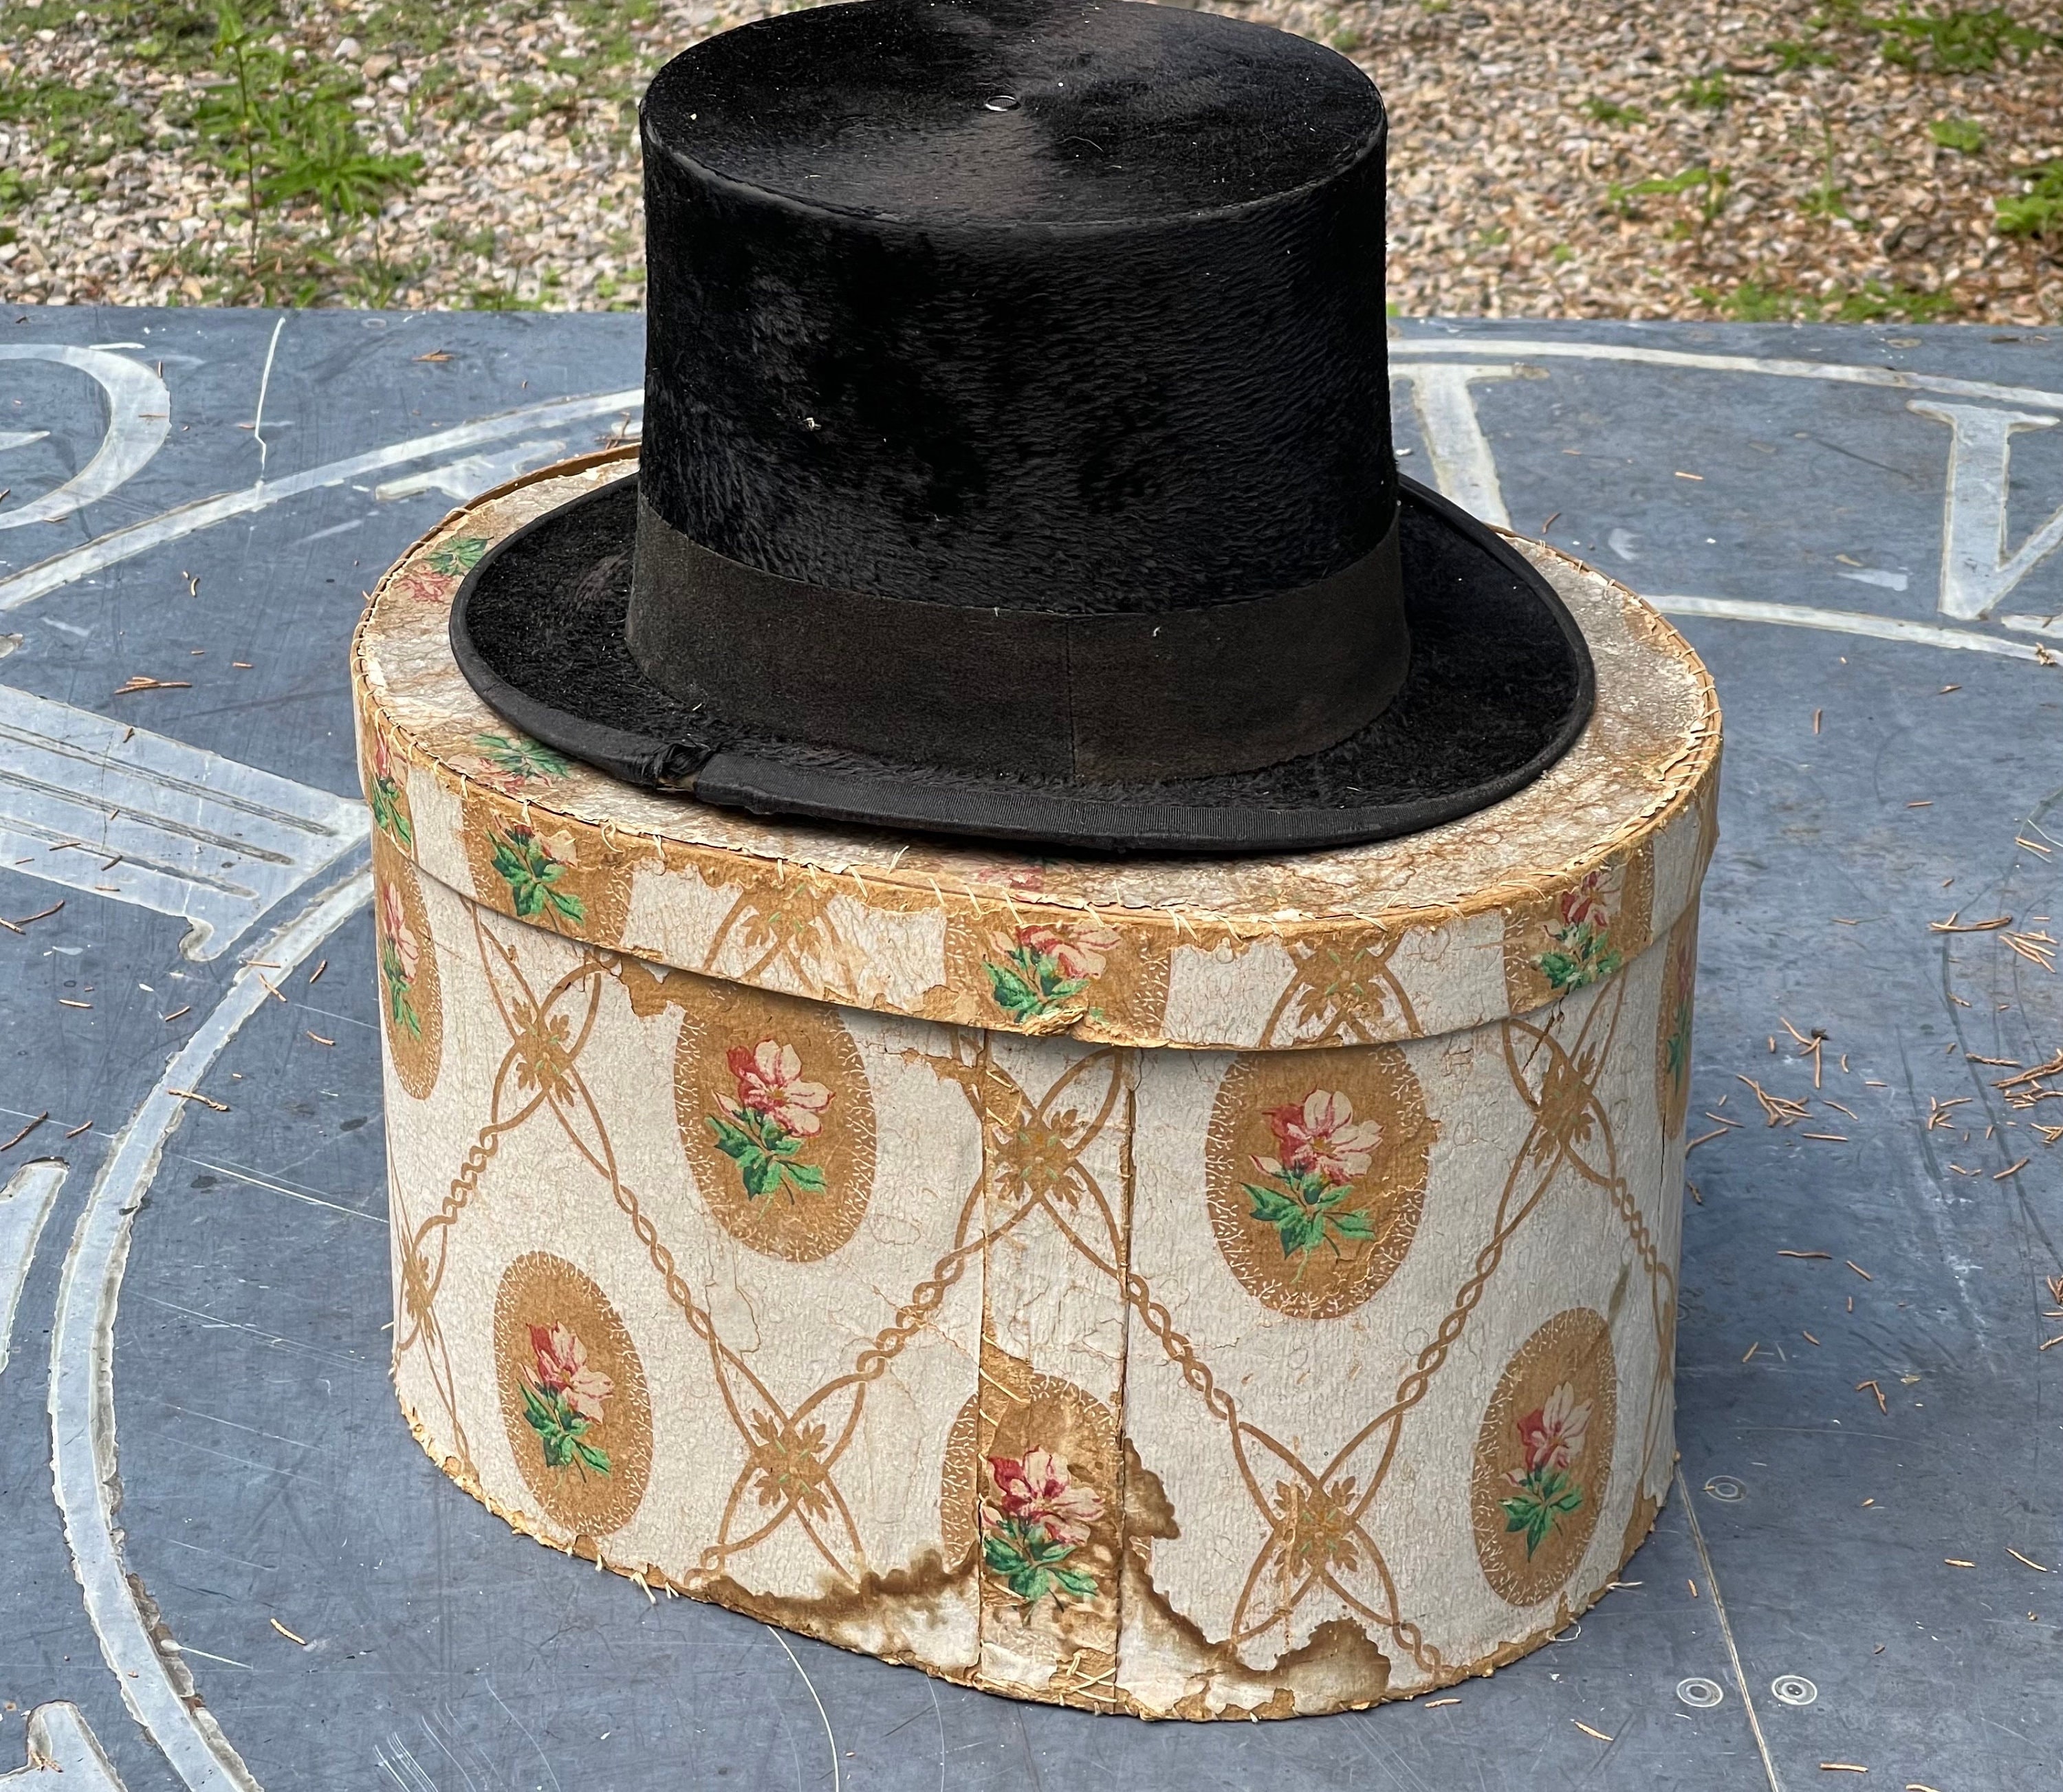 Antique Leather Top Hat Box, Luggage, French Silk Top Hat Inside. Collar Box